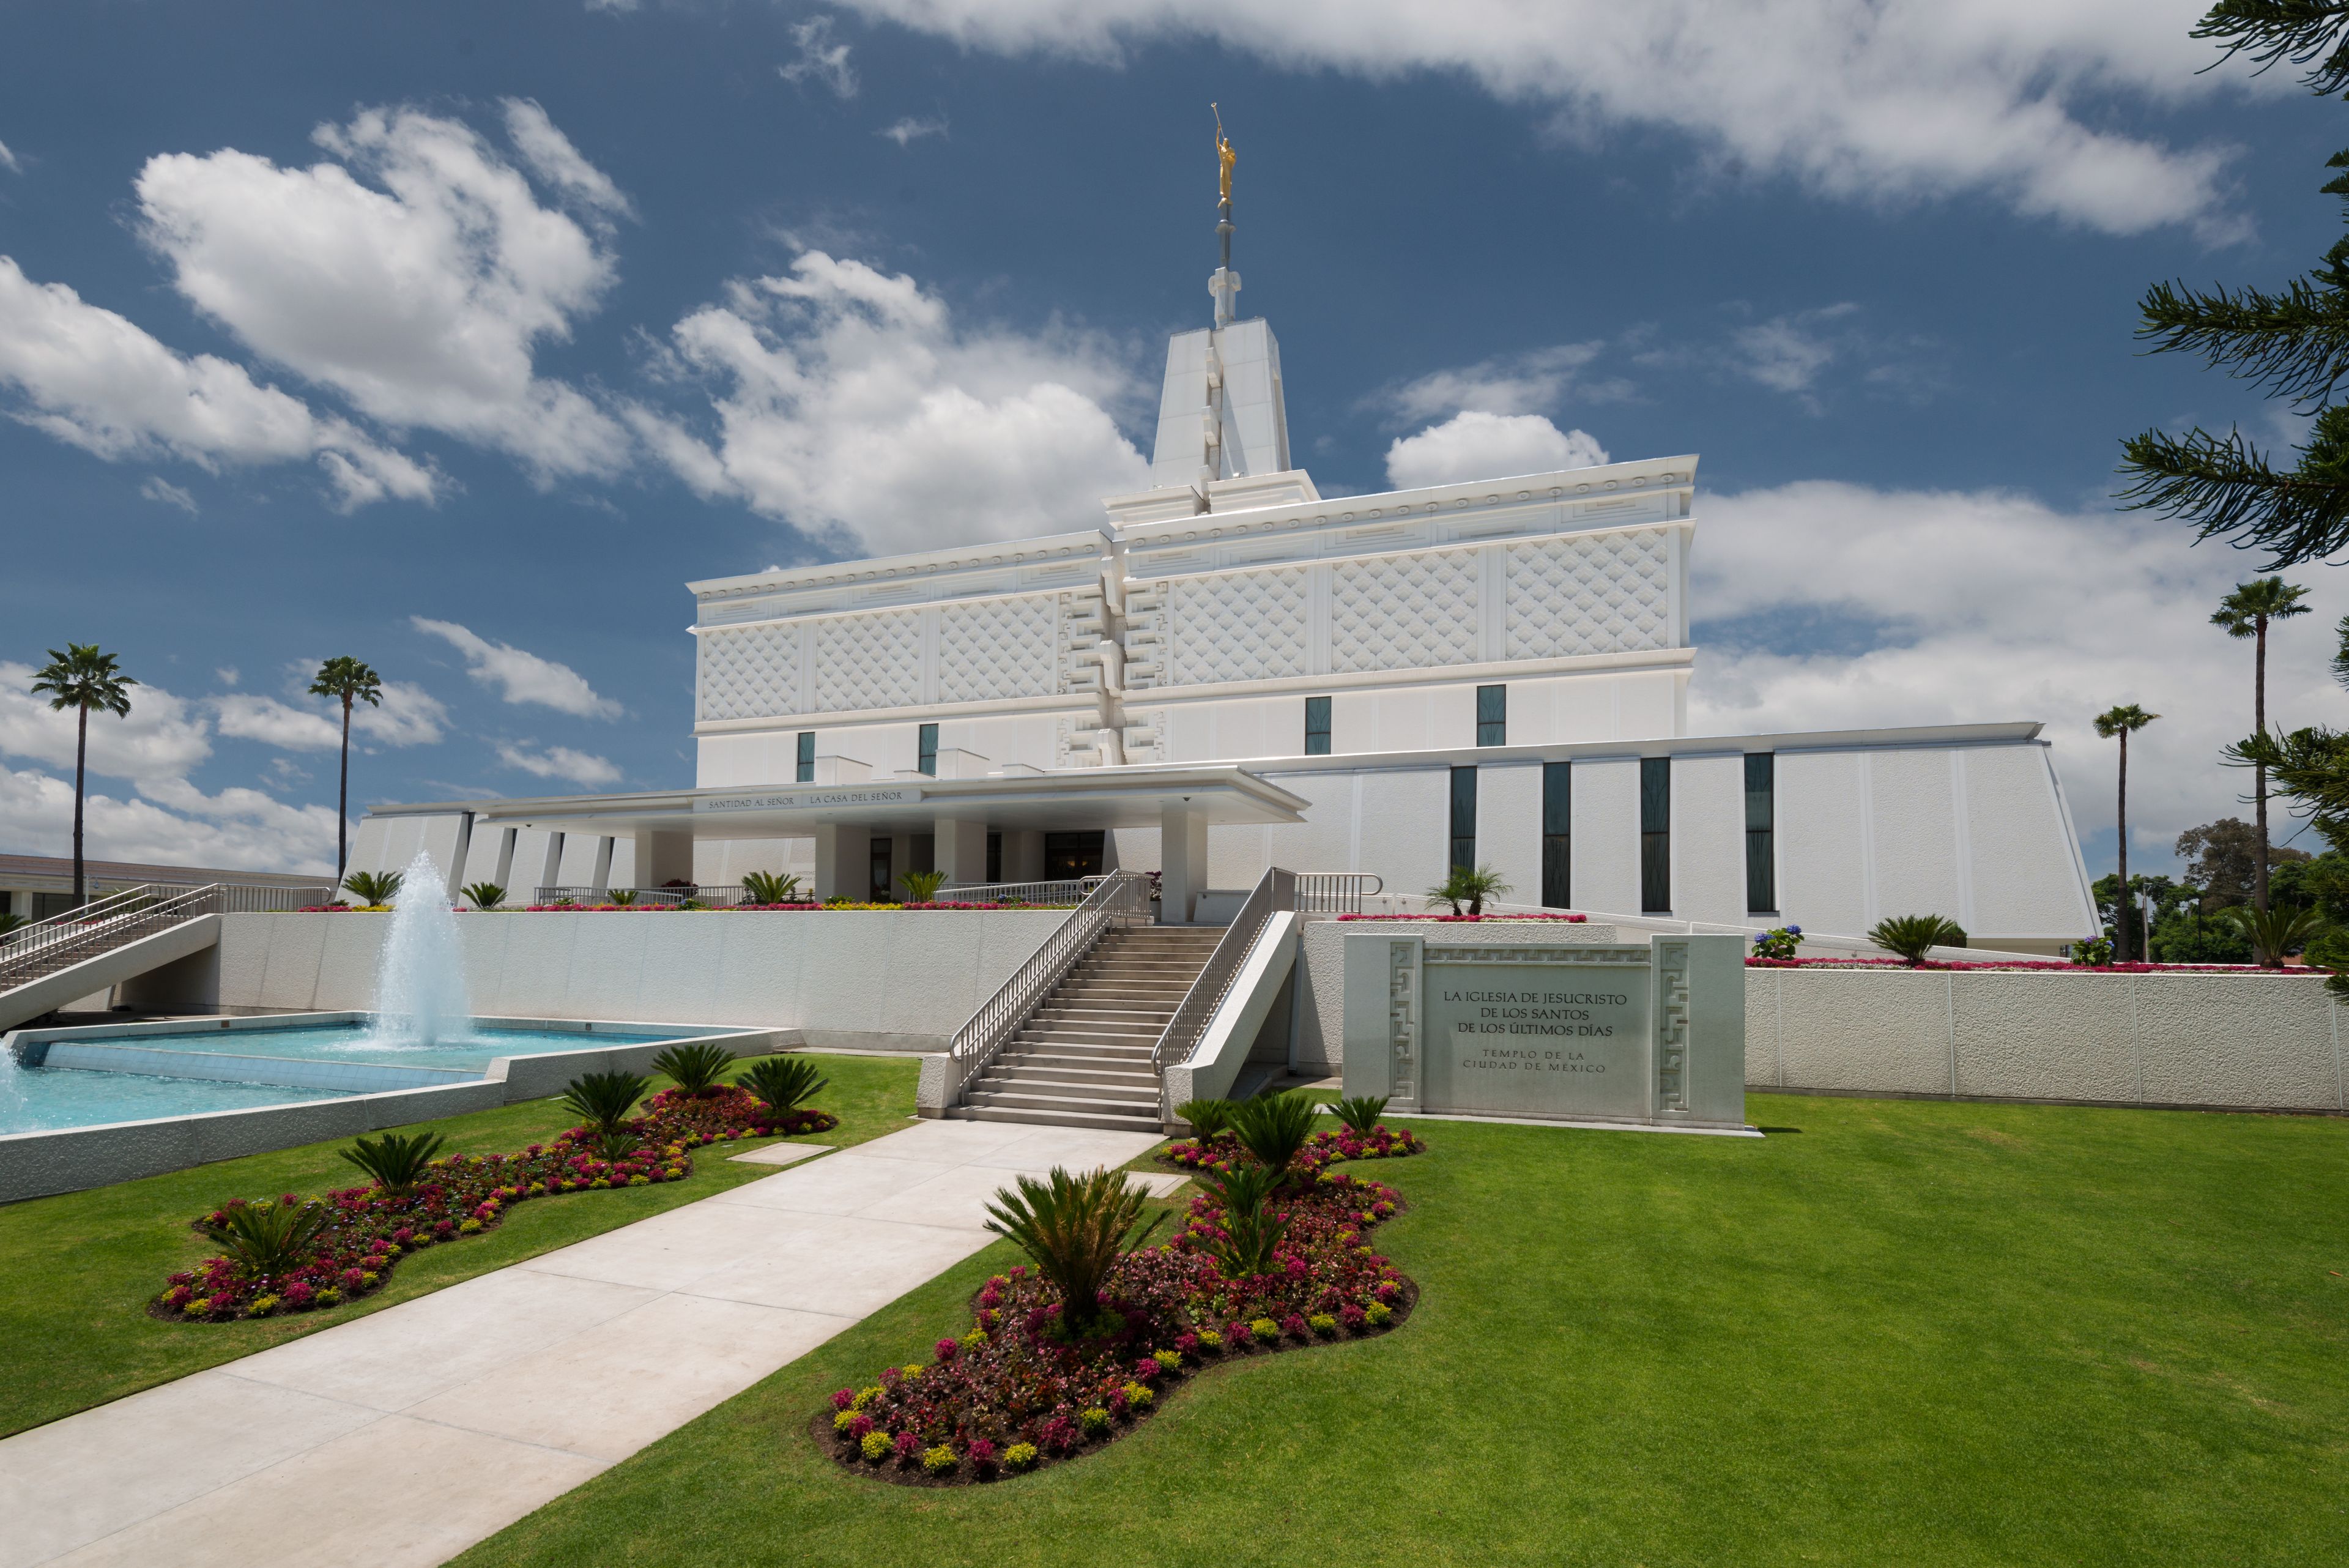 The entrance of the Mexico City Mexico Temple, with green lawns and flower beds in the front.